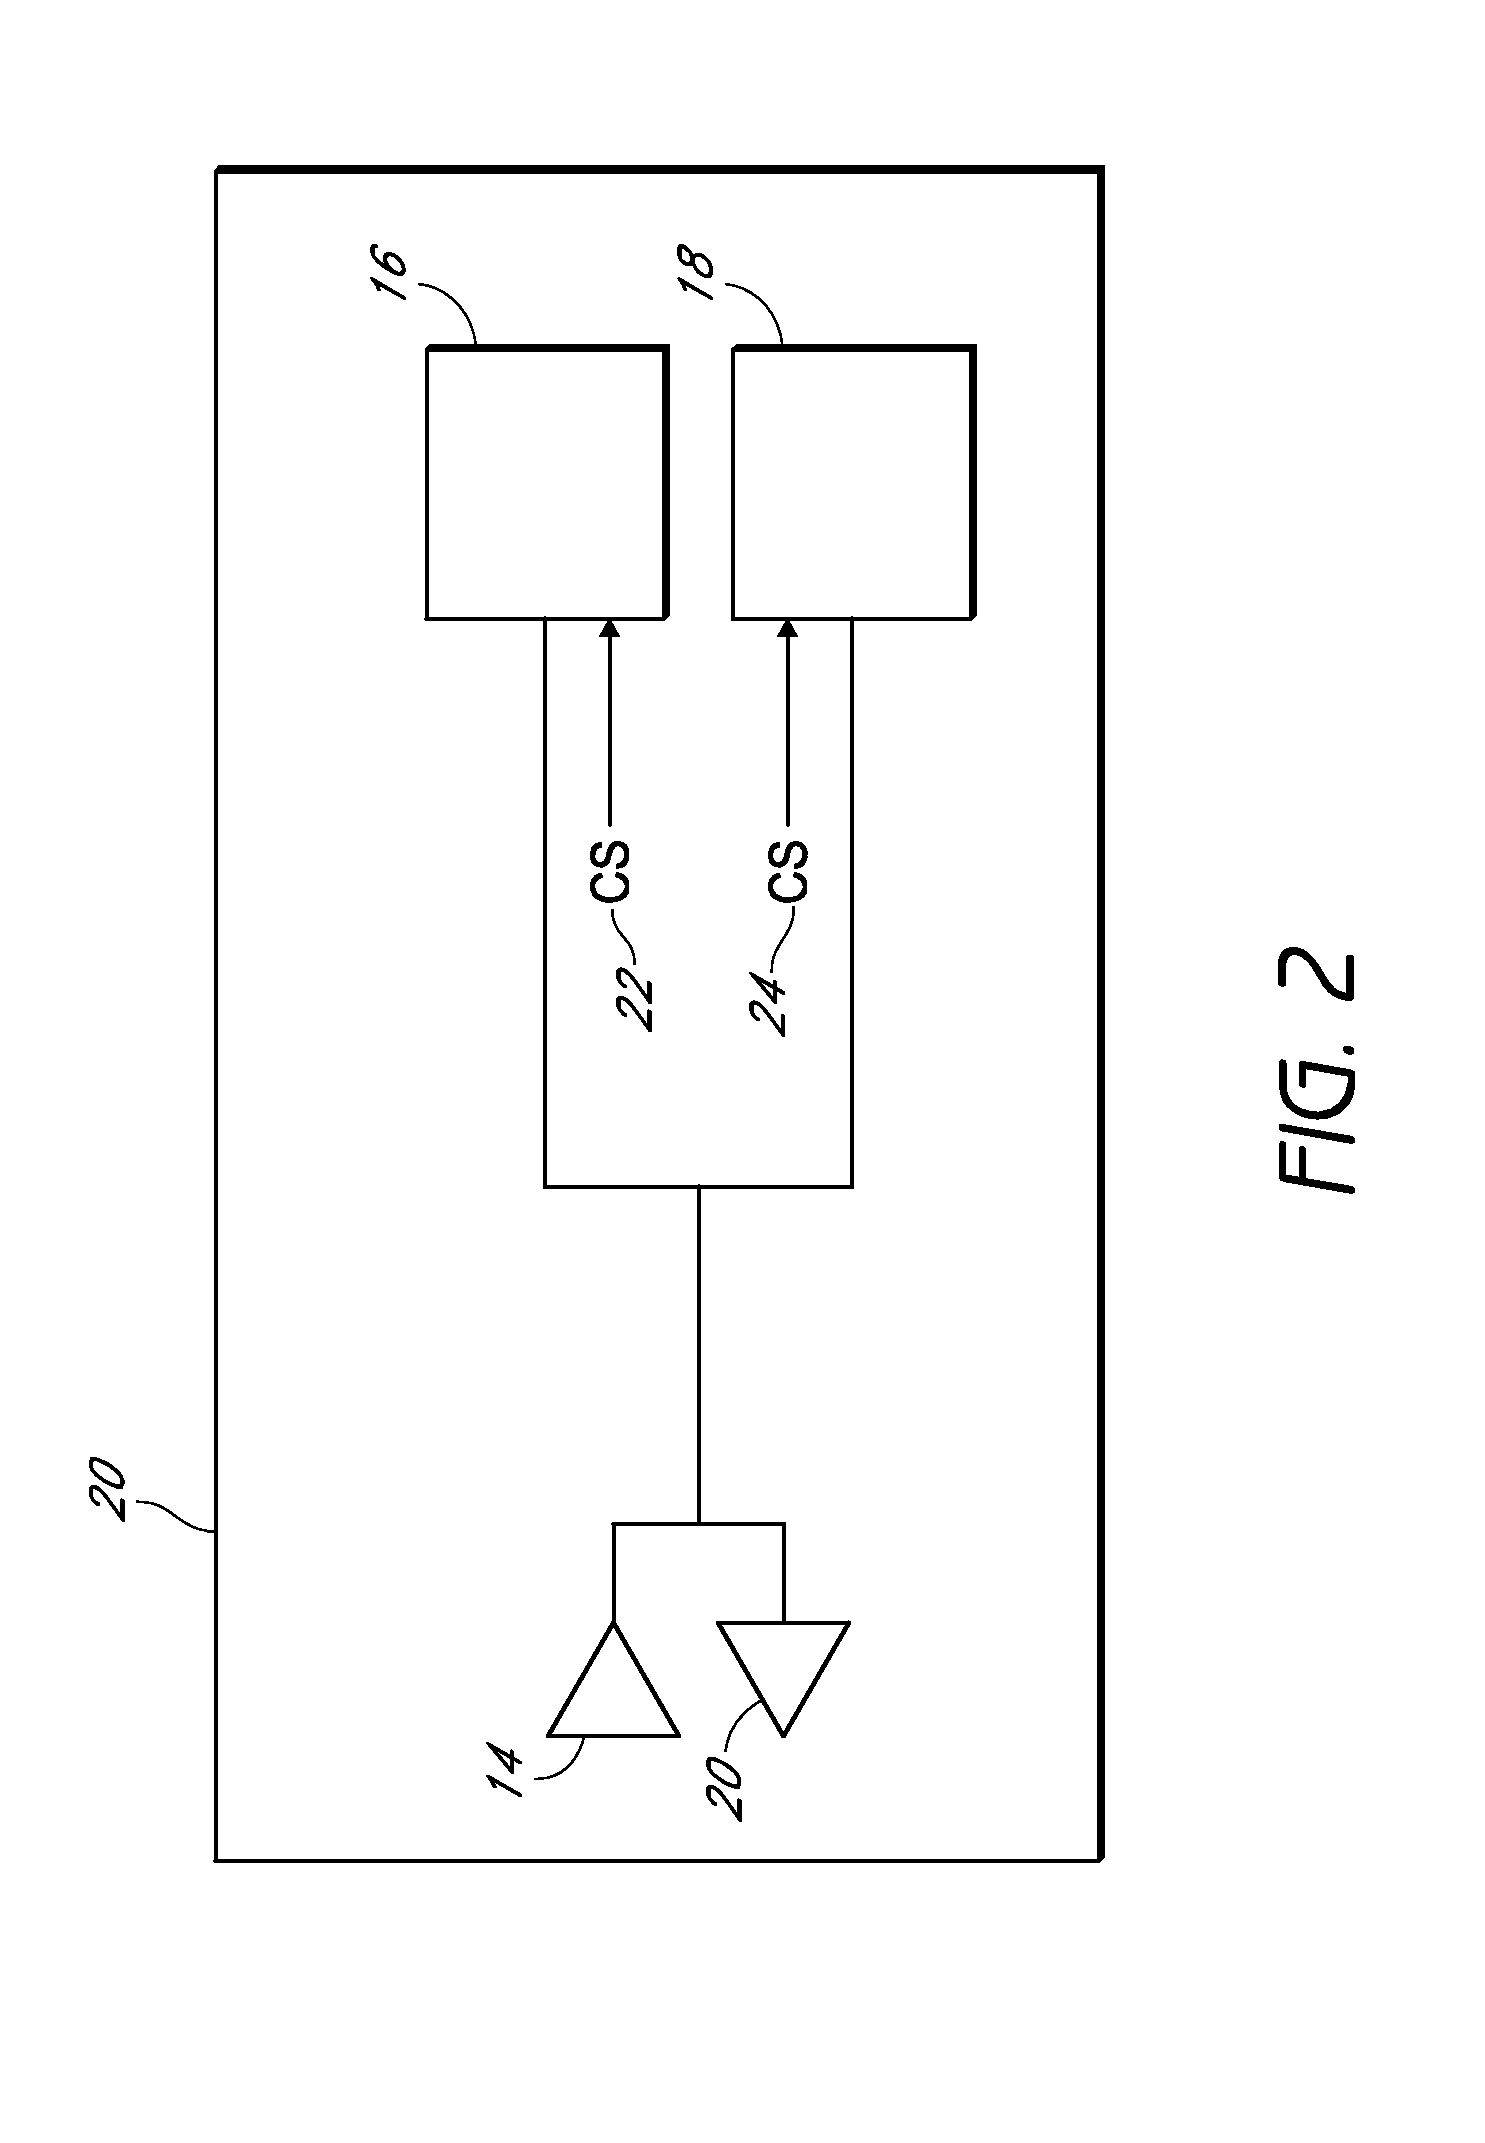 Circuit providing load isolation and noise reduction